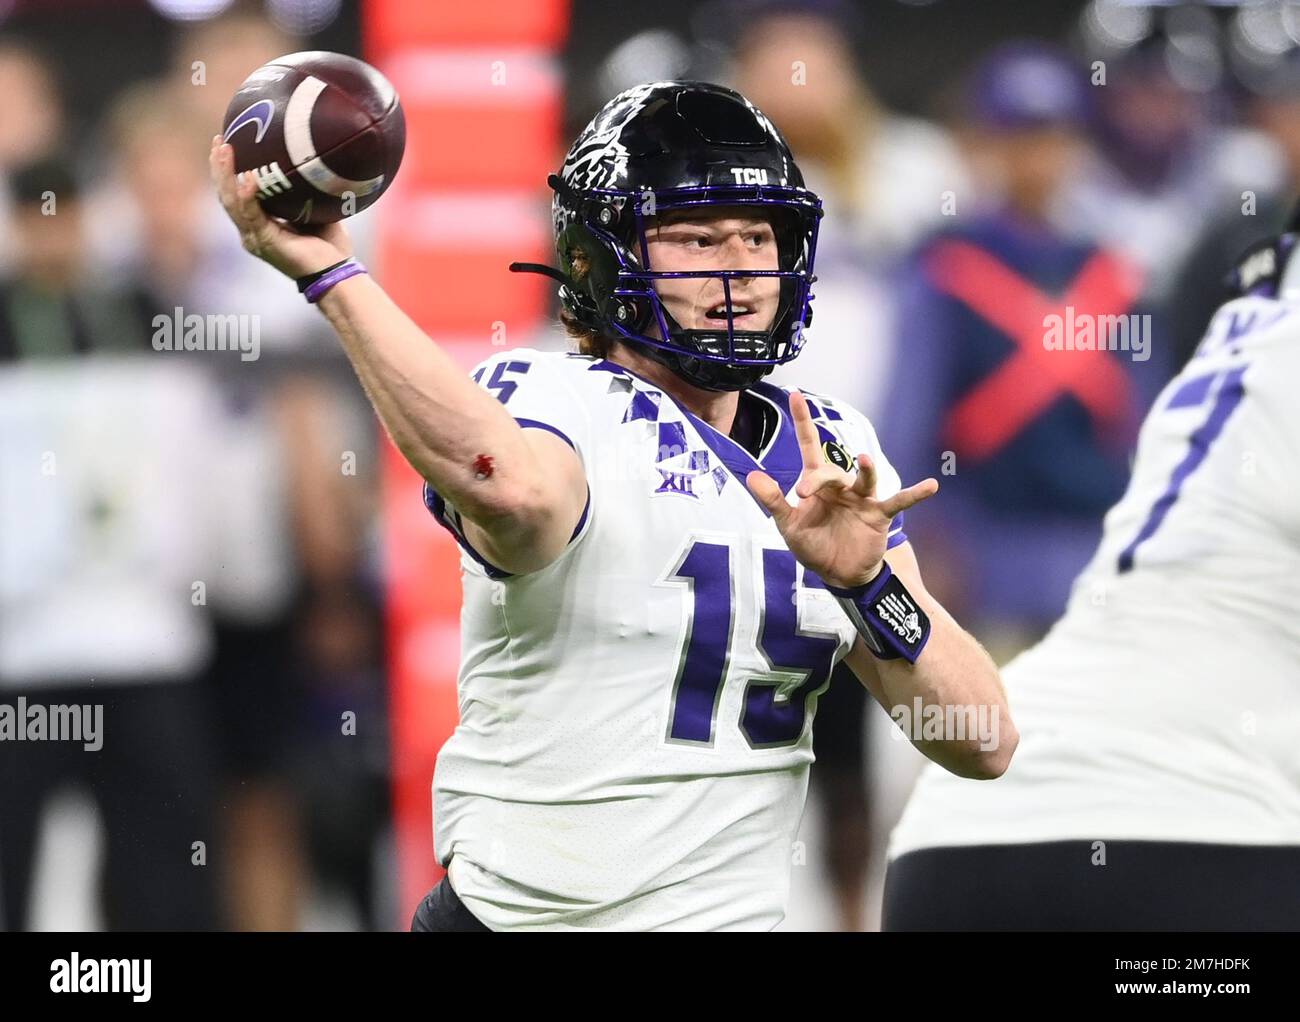 Inglewood, United States. 09th Jan, 2023. TCU Horned Frogs Max Duggan throws a pass in the first quarter against the Georgia Bulldogs at the 2023 NCAA College Football National Championship between Georgia and TCU at SoFi Stadium in Inglewood, California, on Monday, January 9, 2023. Photo by Mike Goulding/UPI Credit: UPI/Alamy Live News Stock Photo